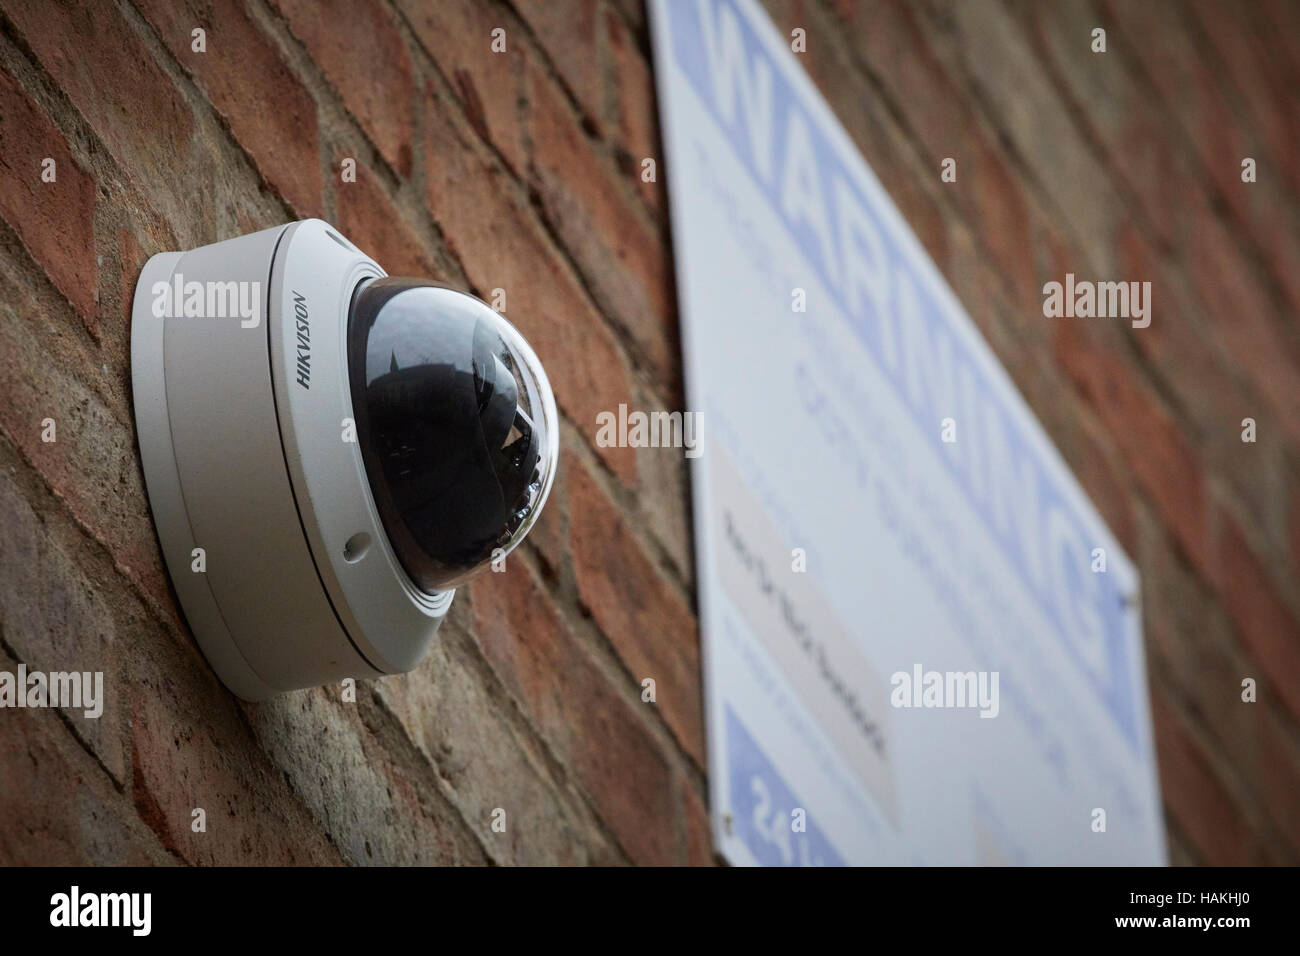 wall mounted dome security camera